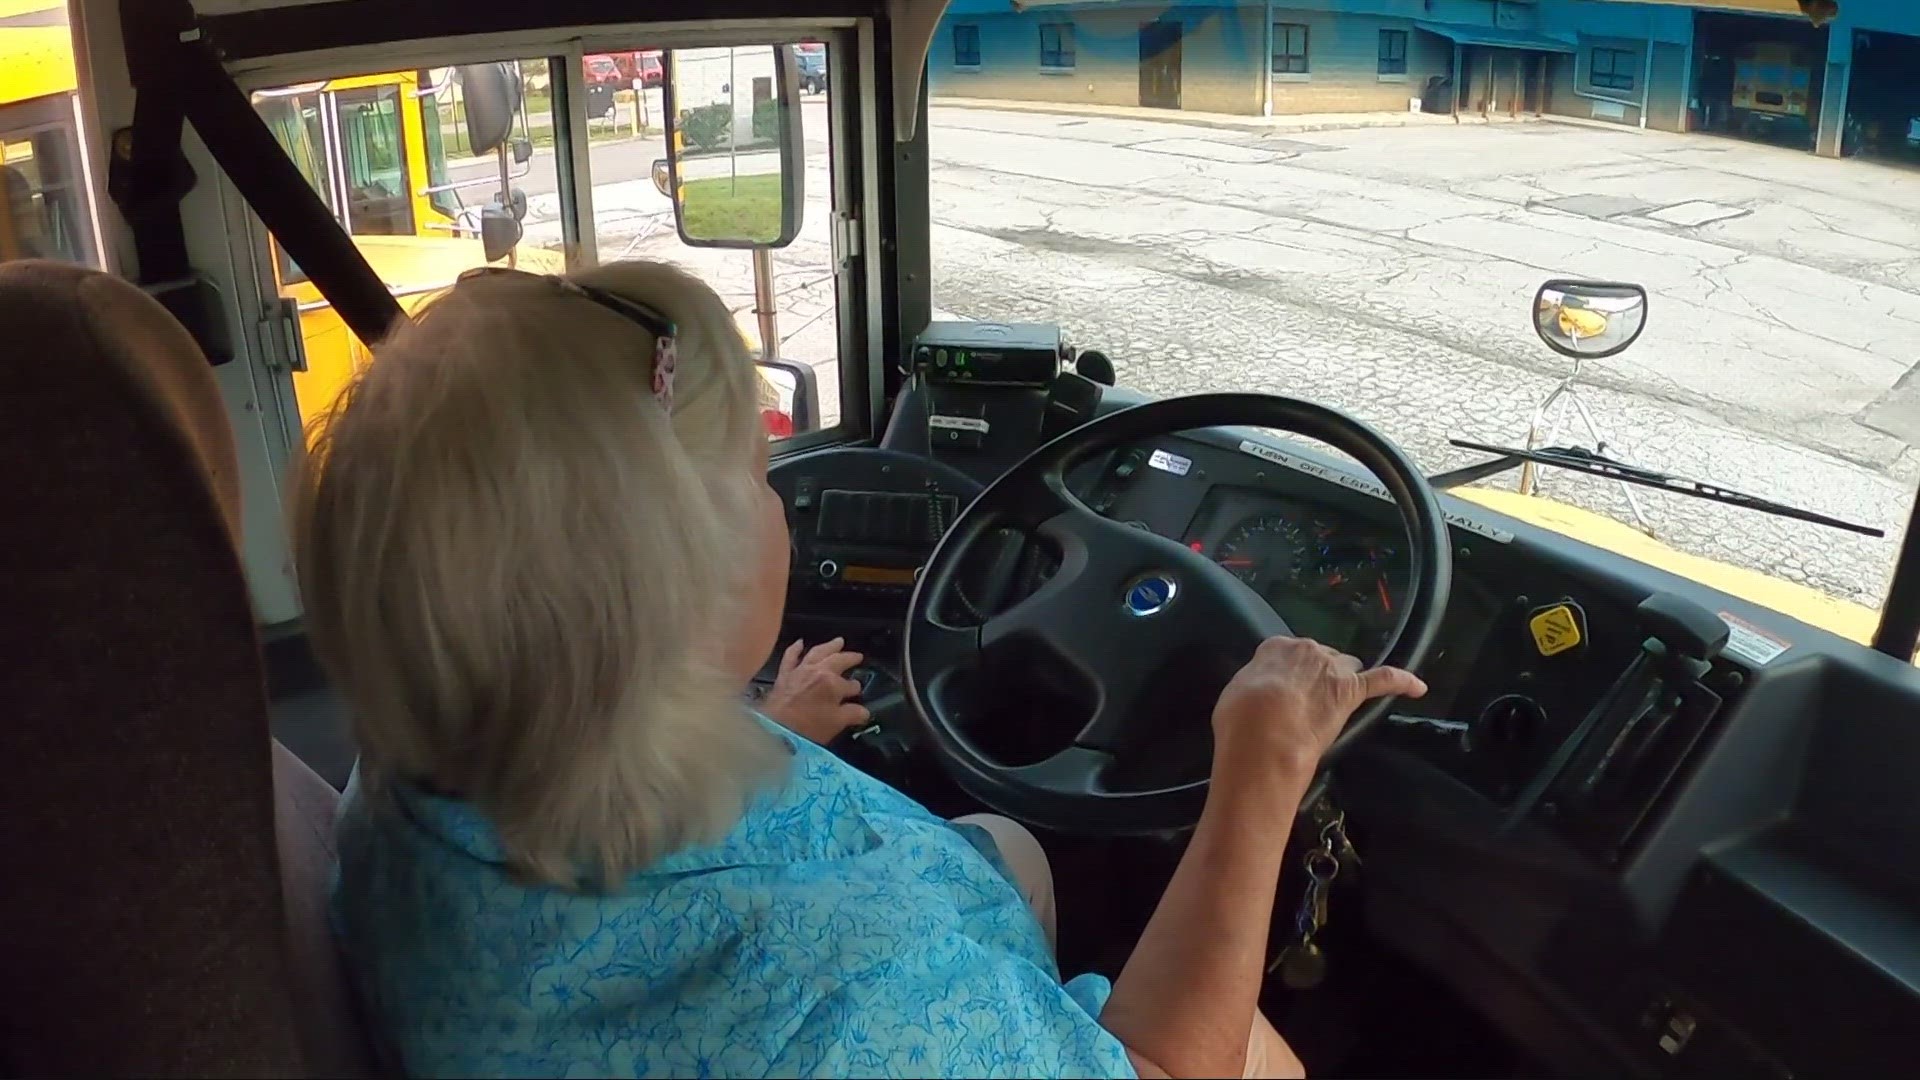 Amid a lack of bus drivers nation-wide, in Northeast Ohio, Bonnie-Jill Piskac comes out of retirement and returns to her route for the 2023-24 school year